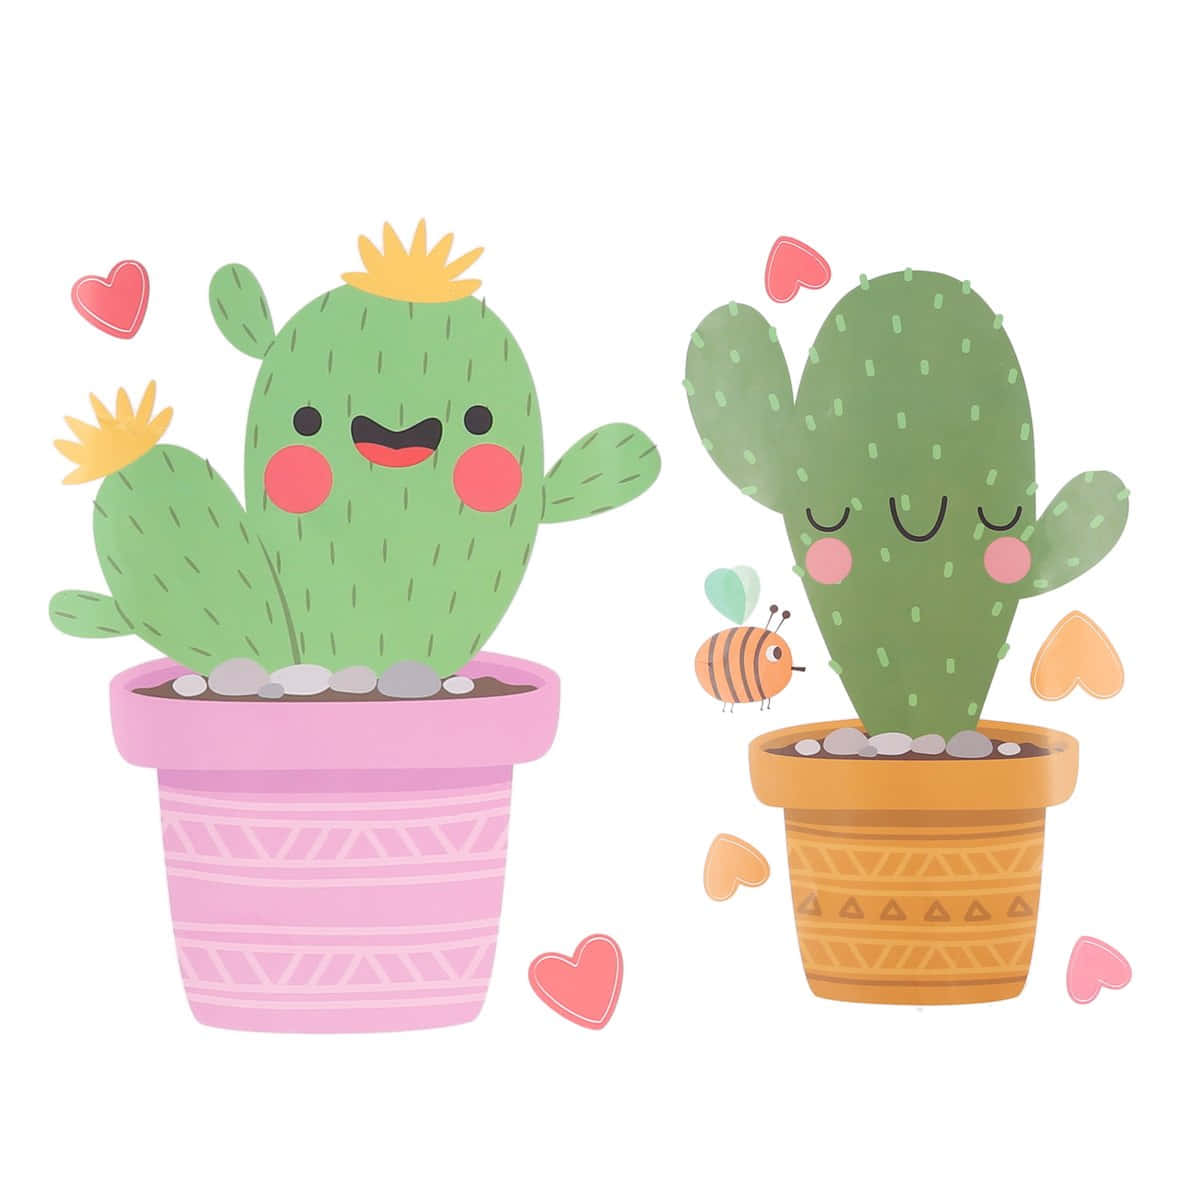 A brightly smiling cactus full of spikes and character Wallpaper